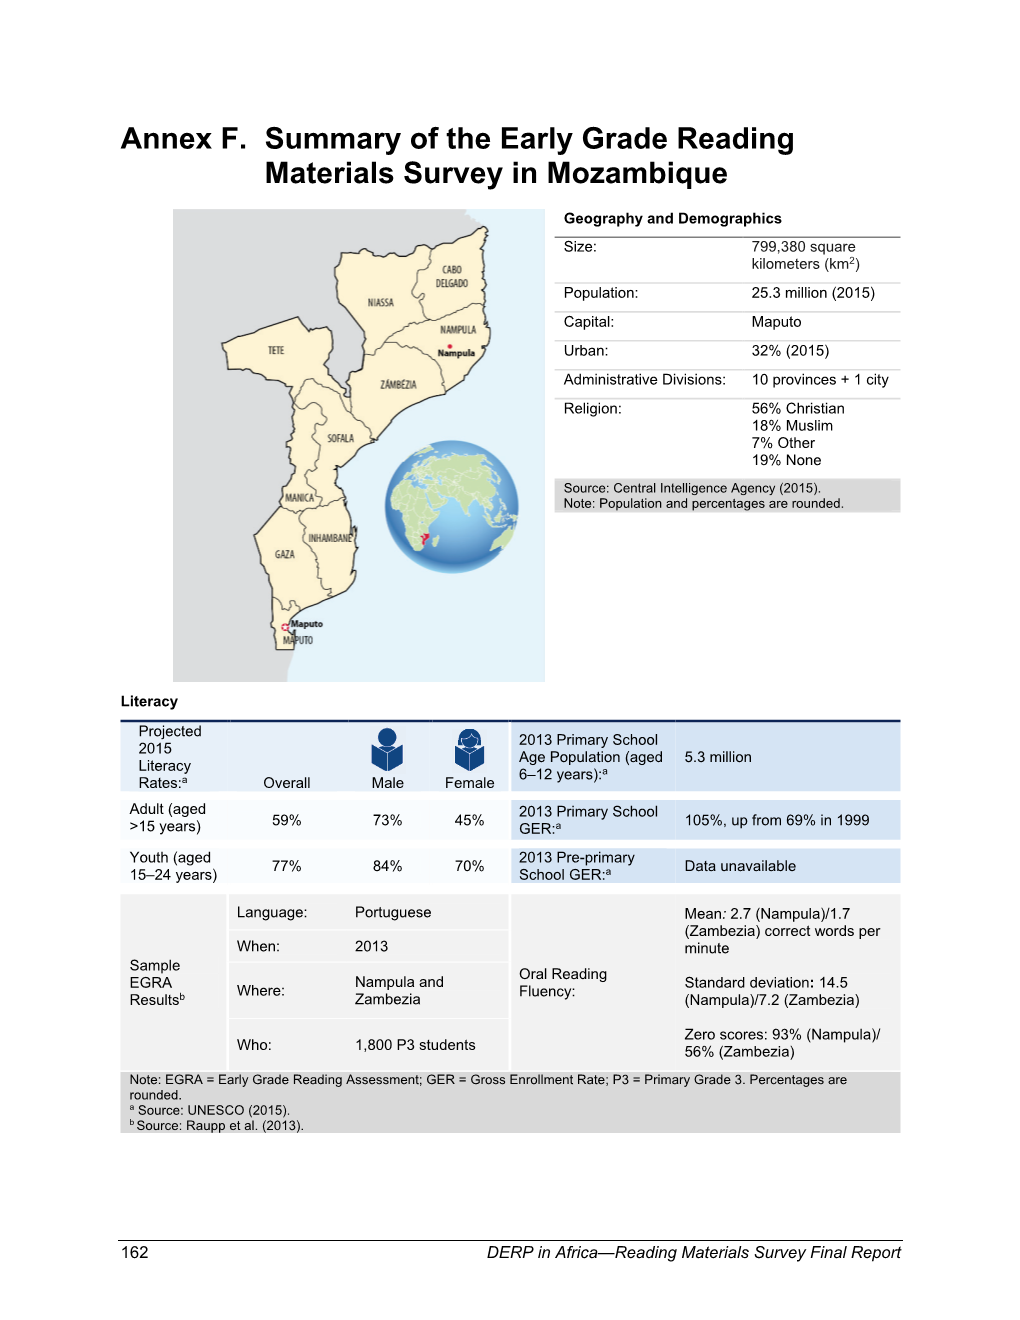 Annex F. Summary of the Early Grade Reading Materials Survey in Mozambique